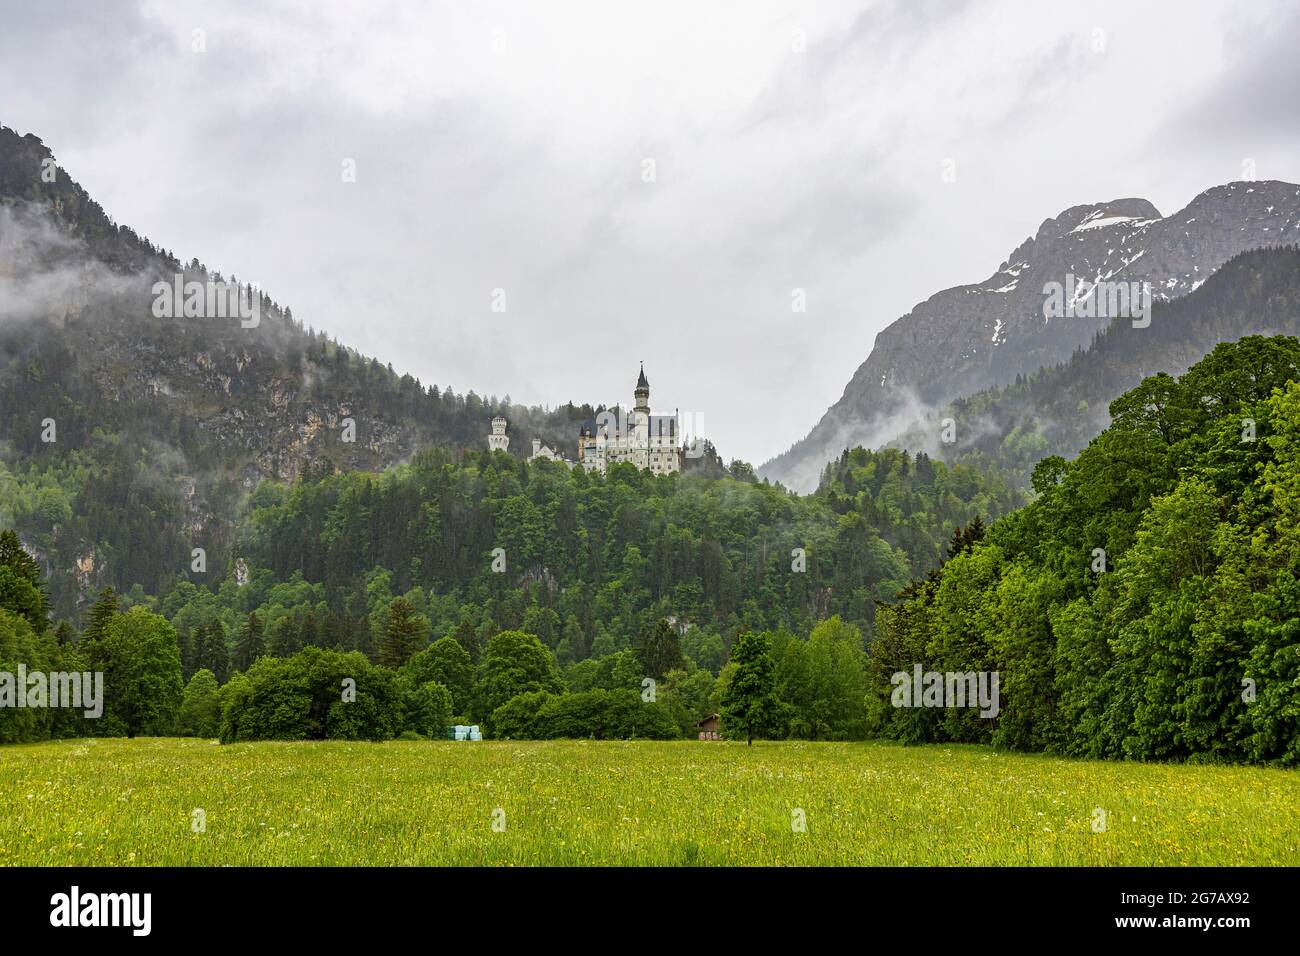 View of Neuschwanstein Castle with clouds and mountains in the background, Schwangau, Upper Bavaria, Germany Stock Photo